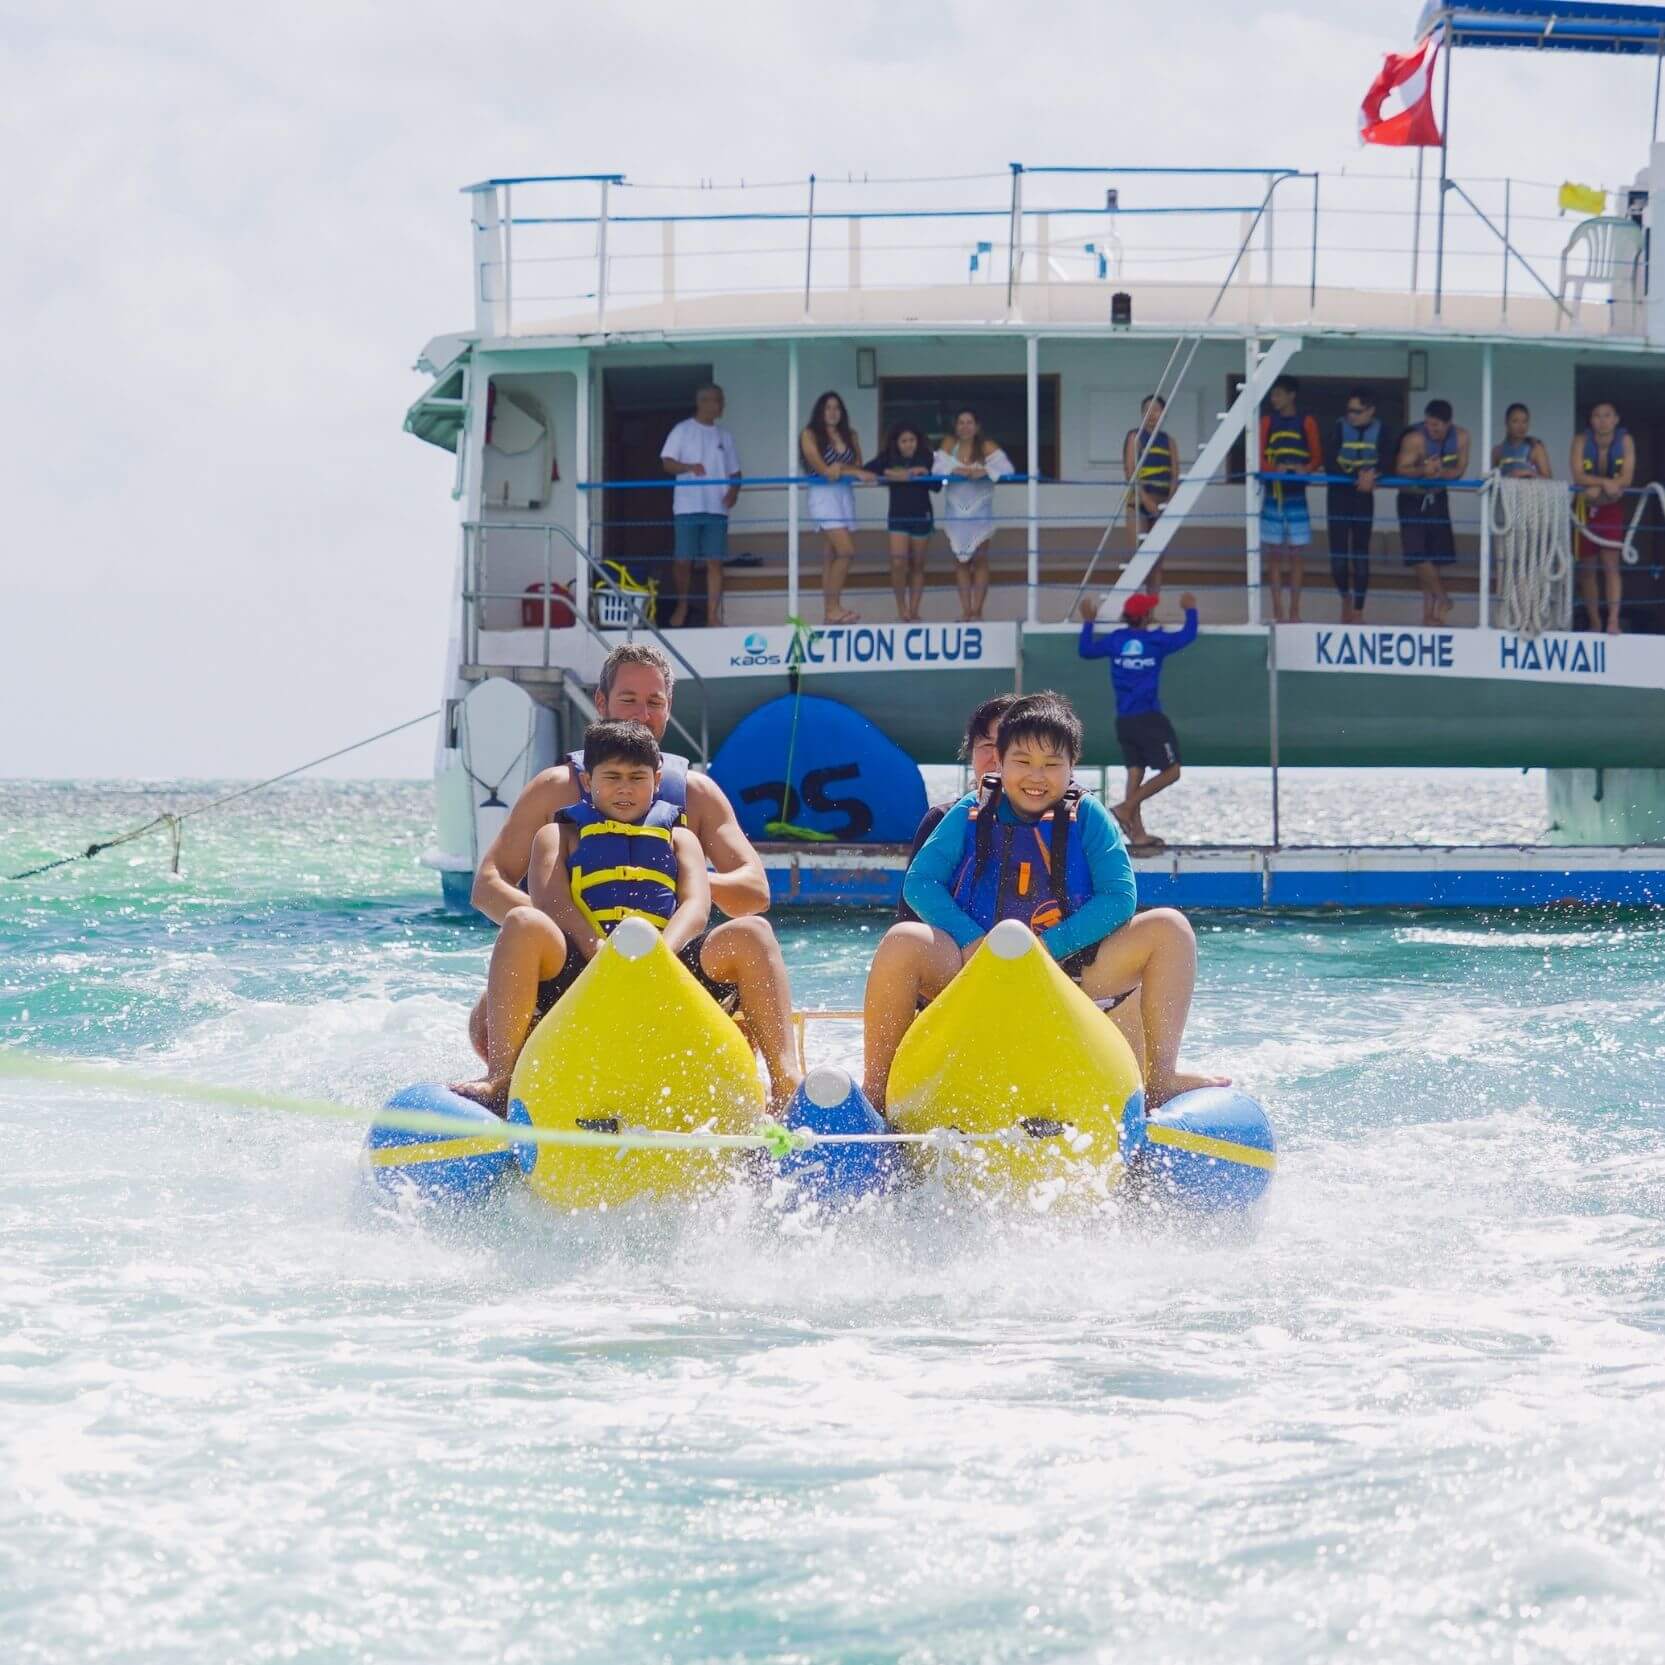 You are currently viewing The Best Family-Friendly Activities at the Kaneohe Sandbar